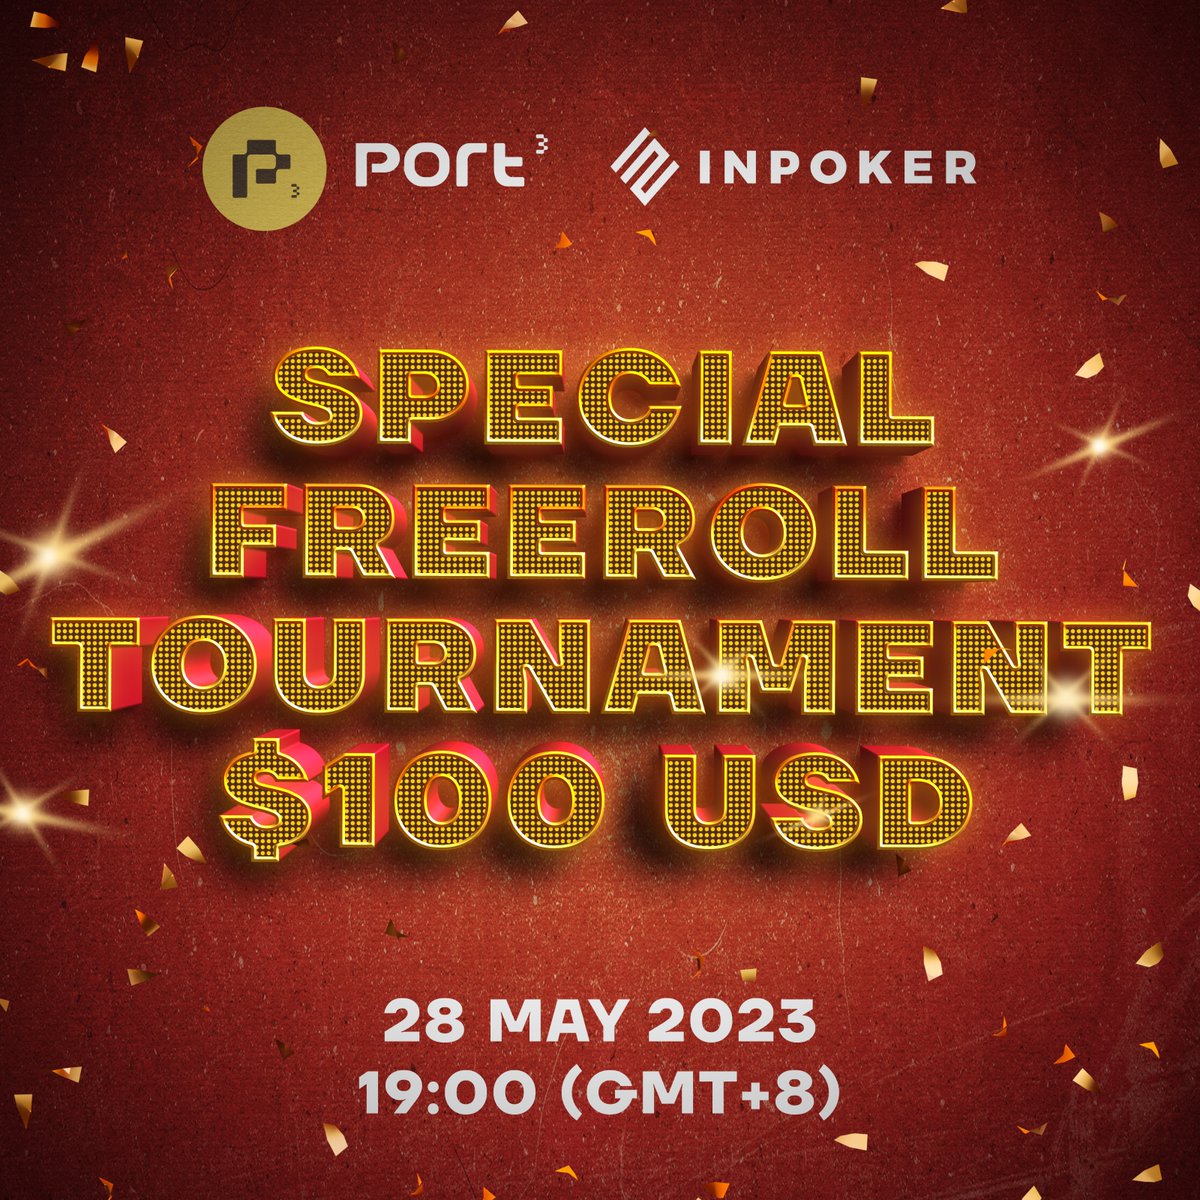 @Port3Network 🚨Happening today!

🎉Join @port3network & @influencerpoker
Poker Tournament $100!
⚡️Completed all tasks & minted your reward from #SoQuest? REGISTER NOW!

👉Tutorial on how to claim the ticket & register: bit.ly/InPoker
📅Join the game TODAY: 28.05, 11 UTC (7pm GMT+8)